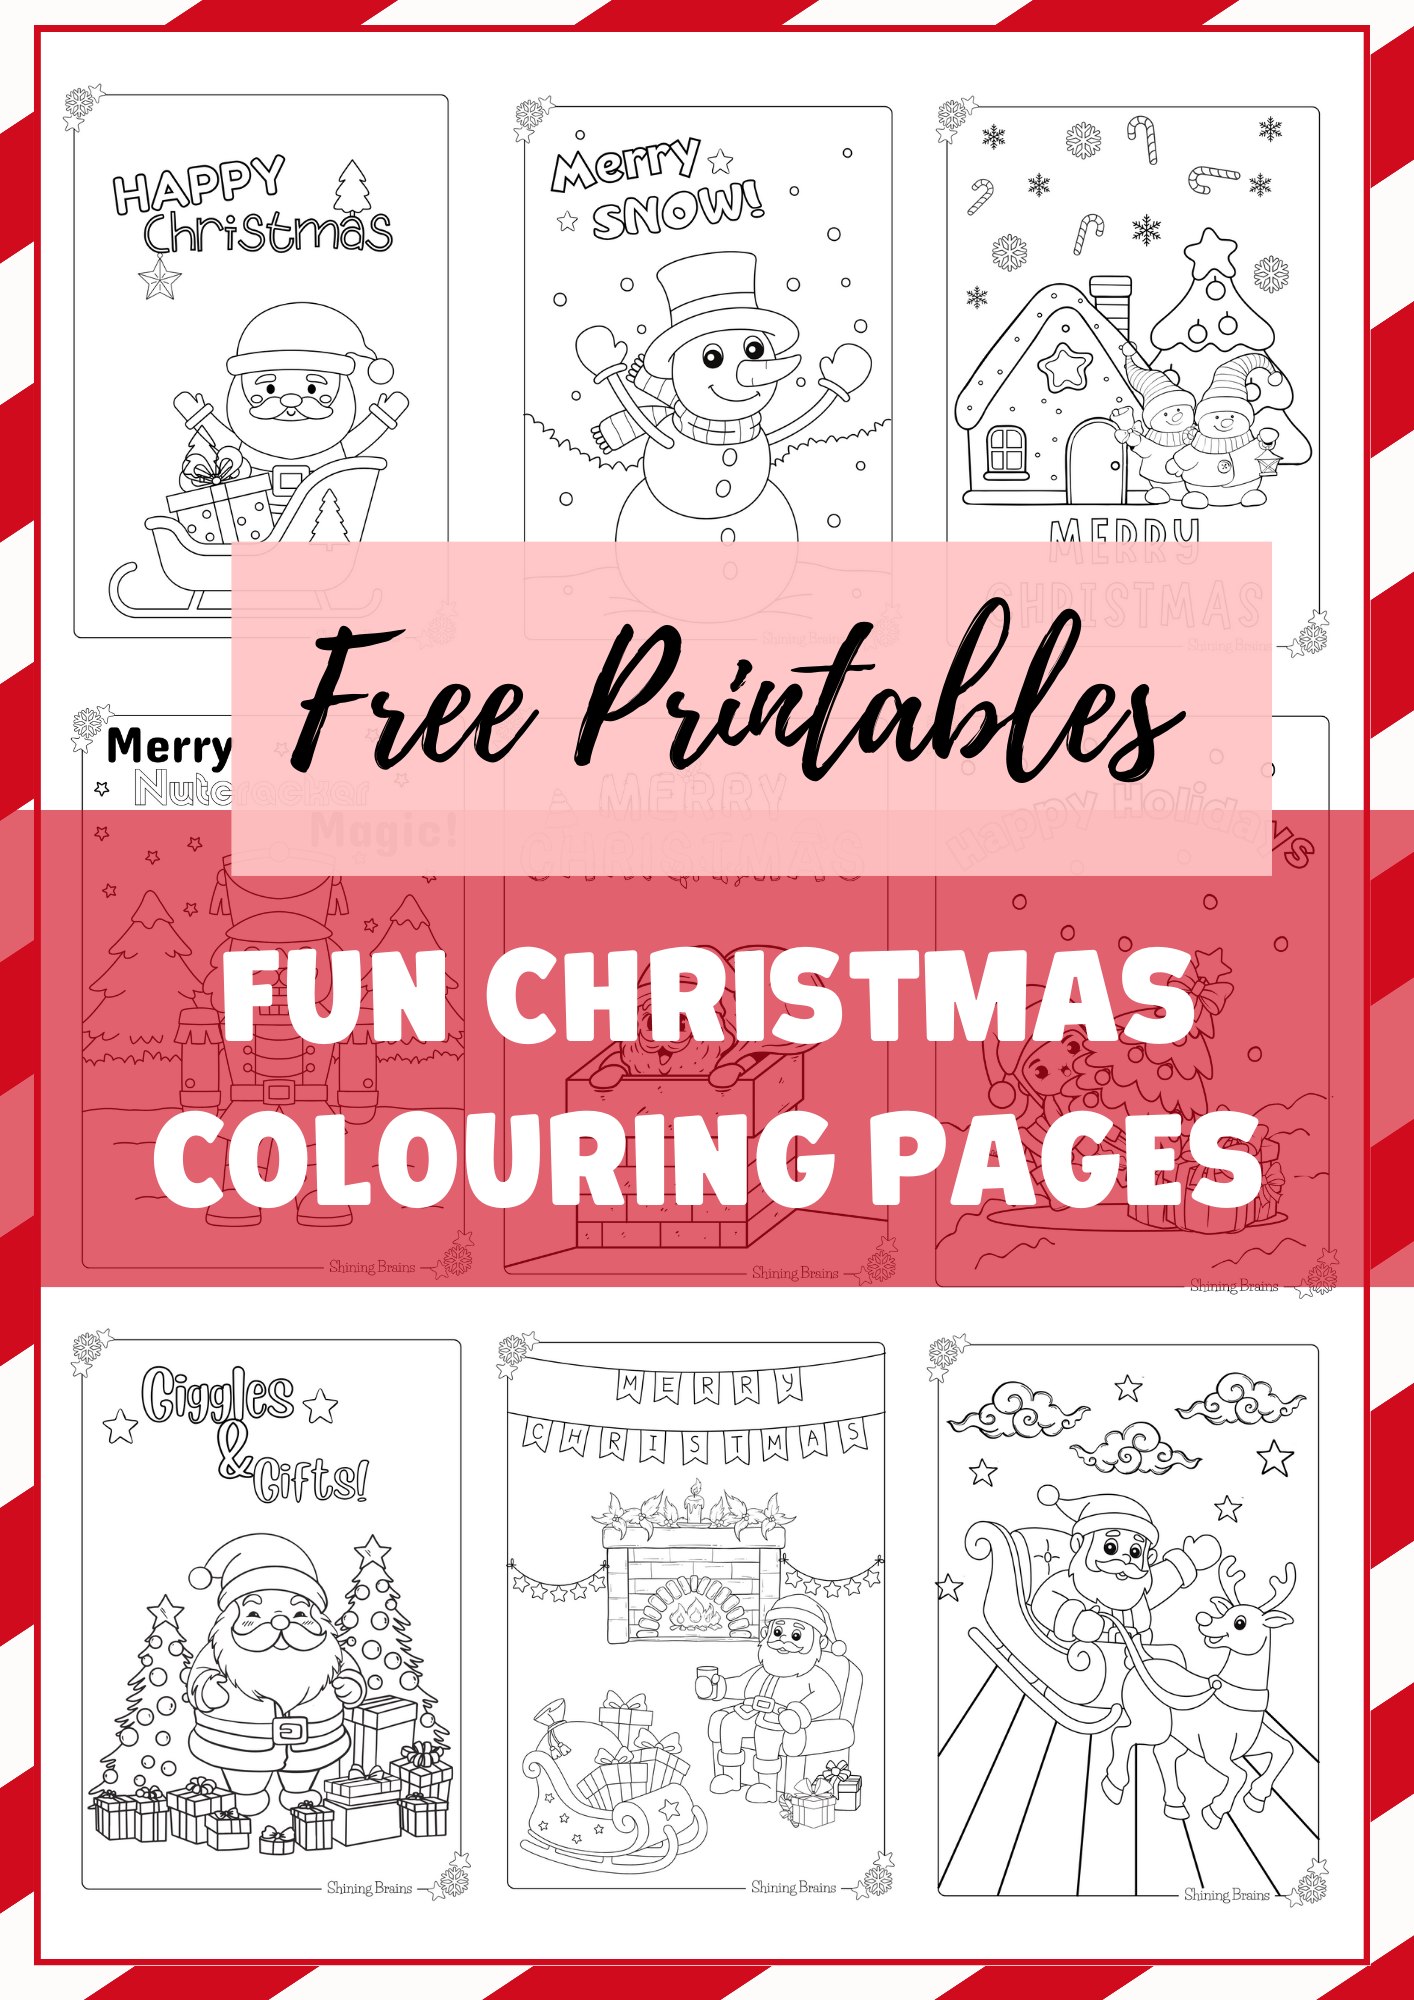 Christmas Coloring Pages | Fun Christmas Coloring in Pages